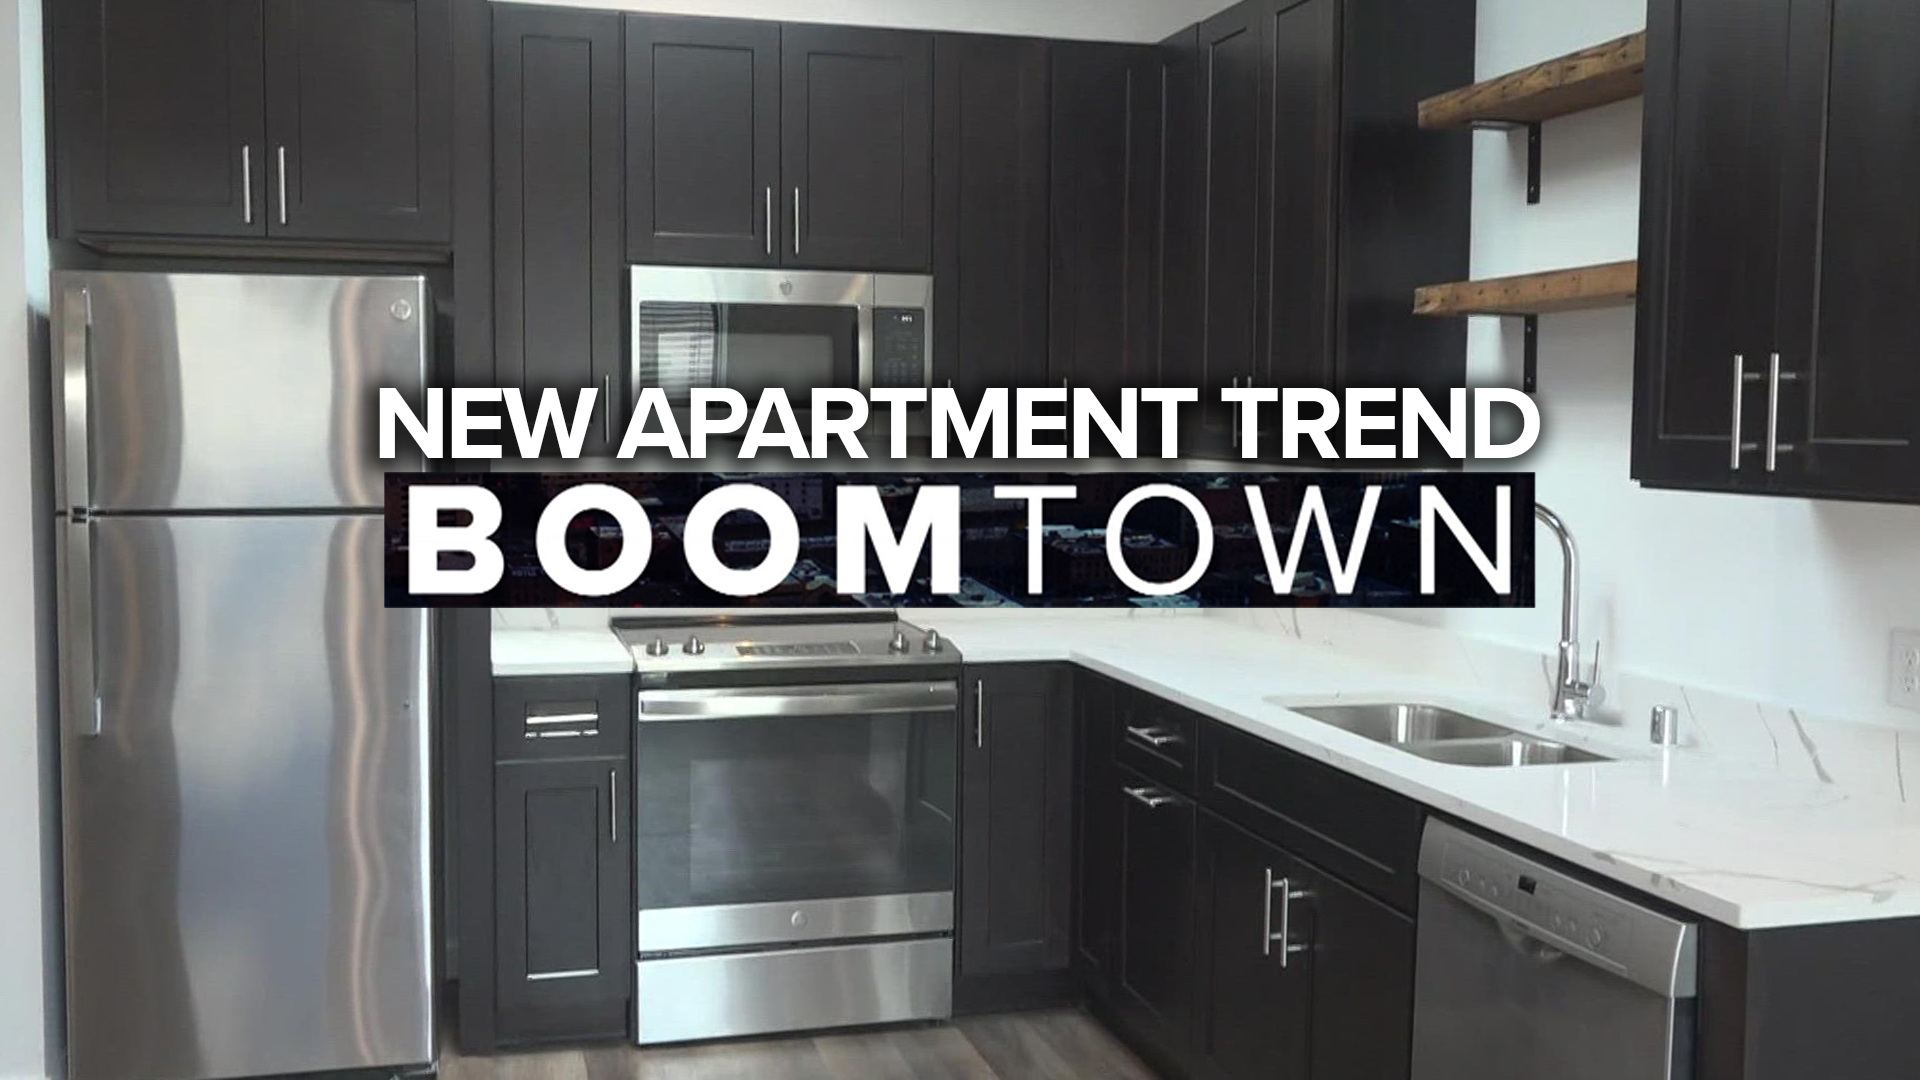 That trend is reducing apartments from three bedrooms down to two and one-bedroom units.